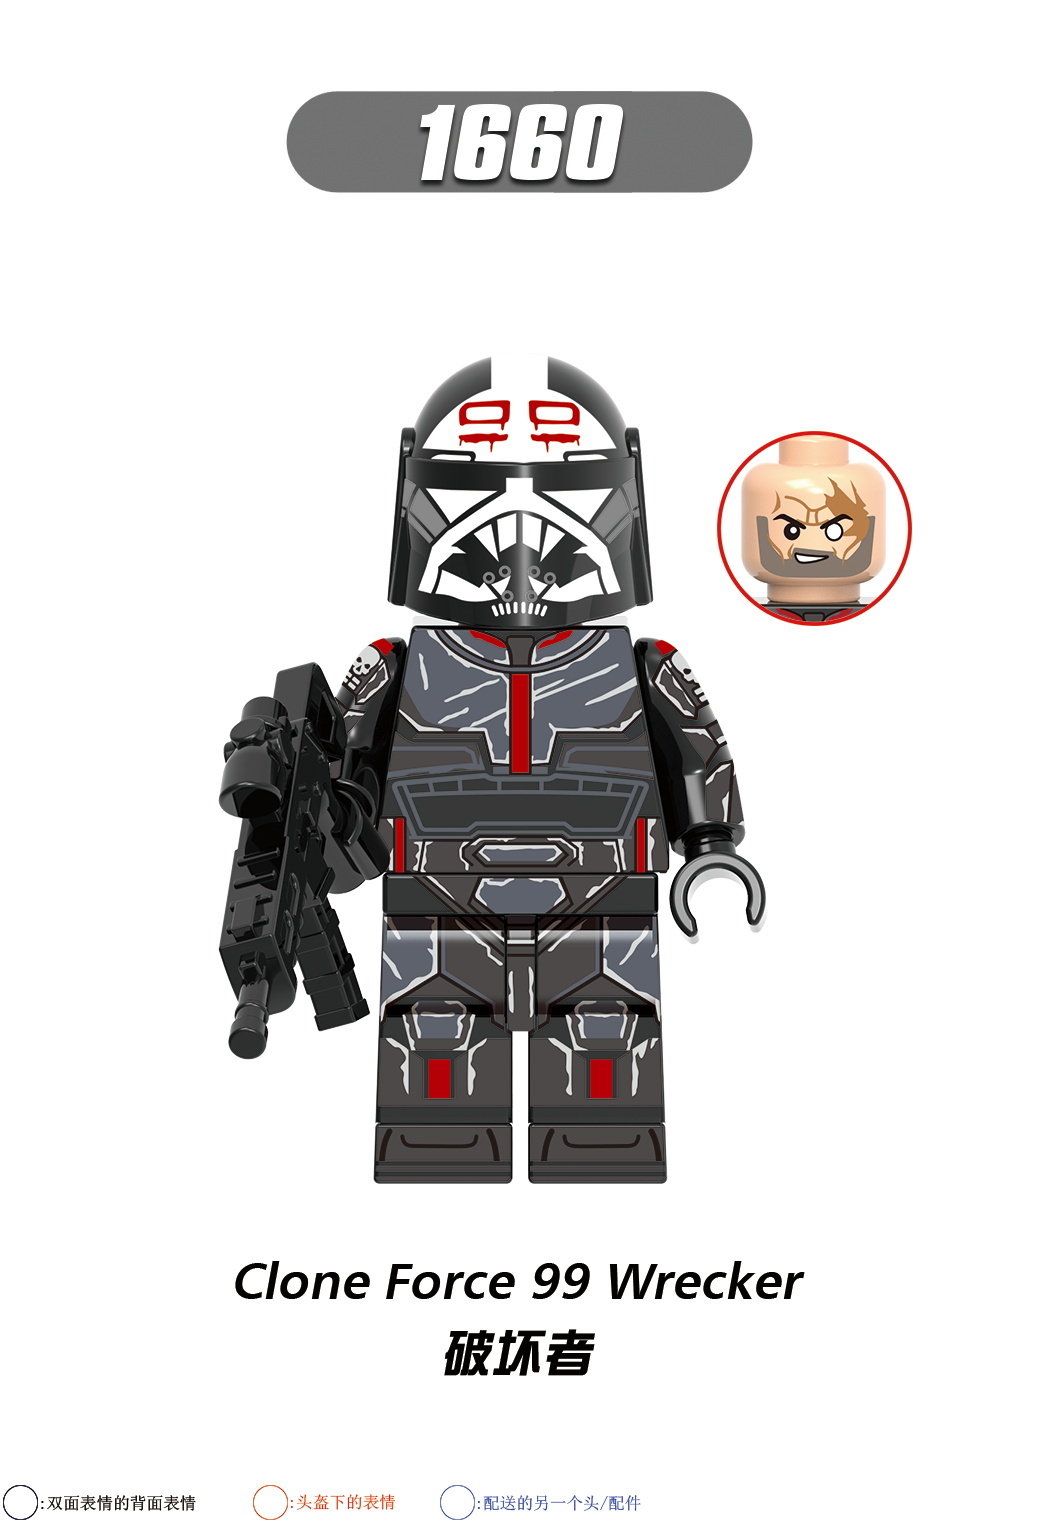 XH 1656 1657 1658 1659 1660 1661 1662 1663 X0307 Star Wars Bricks Building Blocks Movie Series Characters Action Figures Educational Toys For Children's Gifts